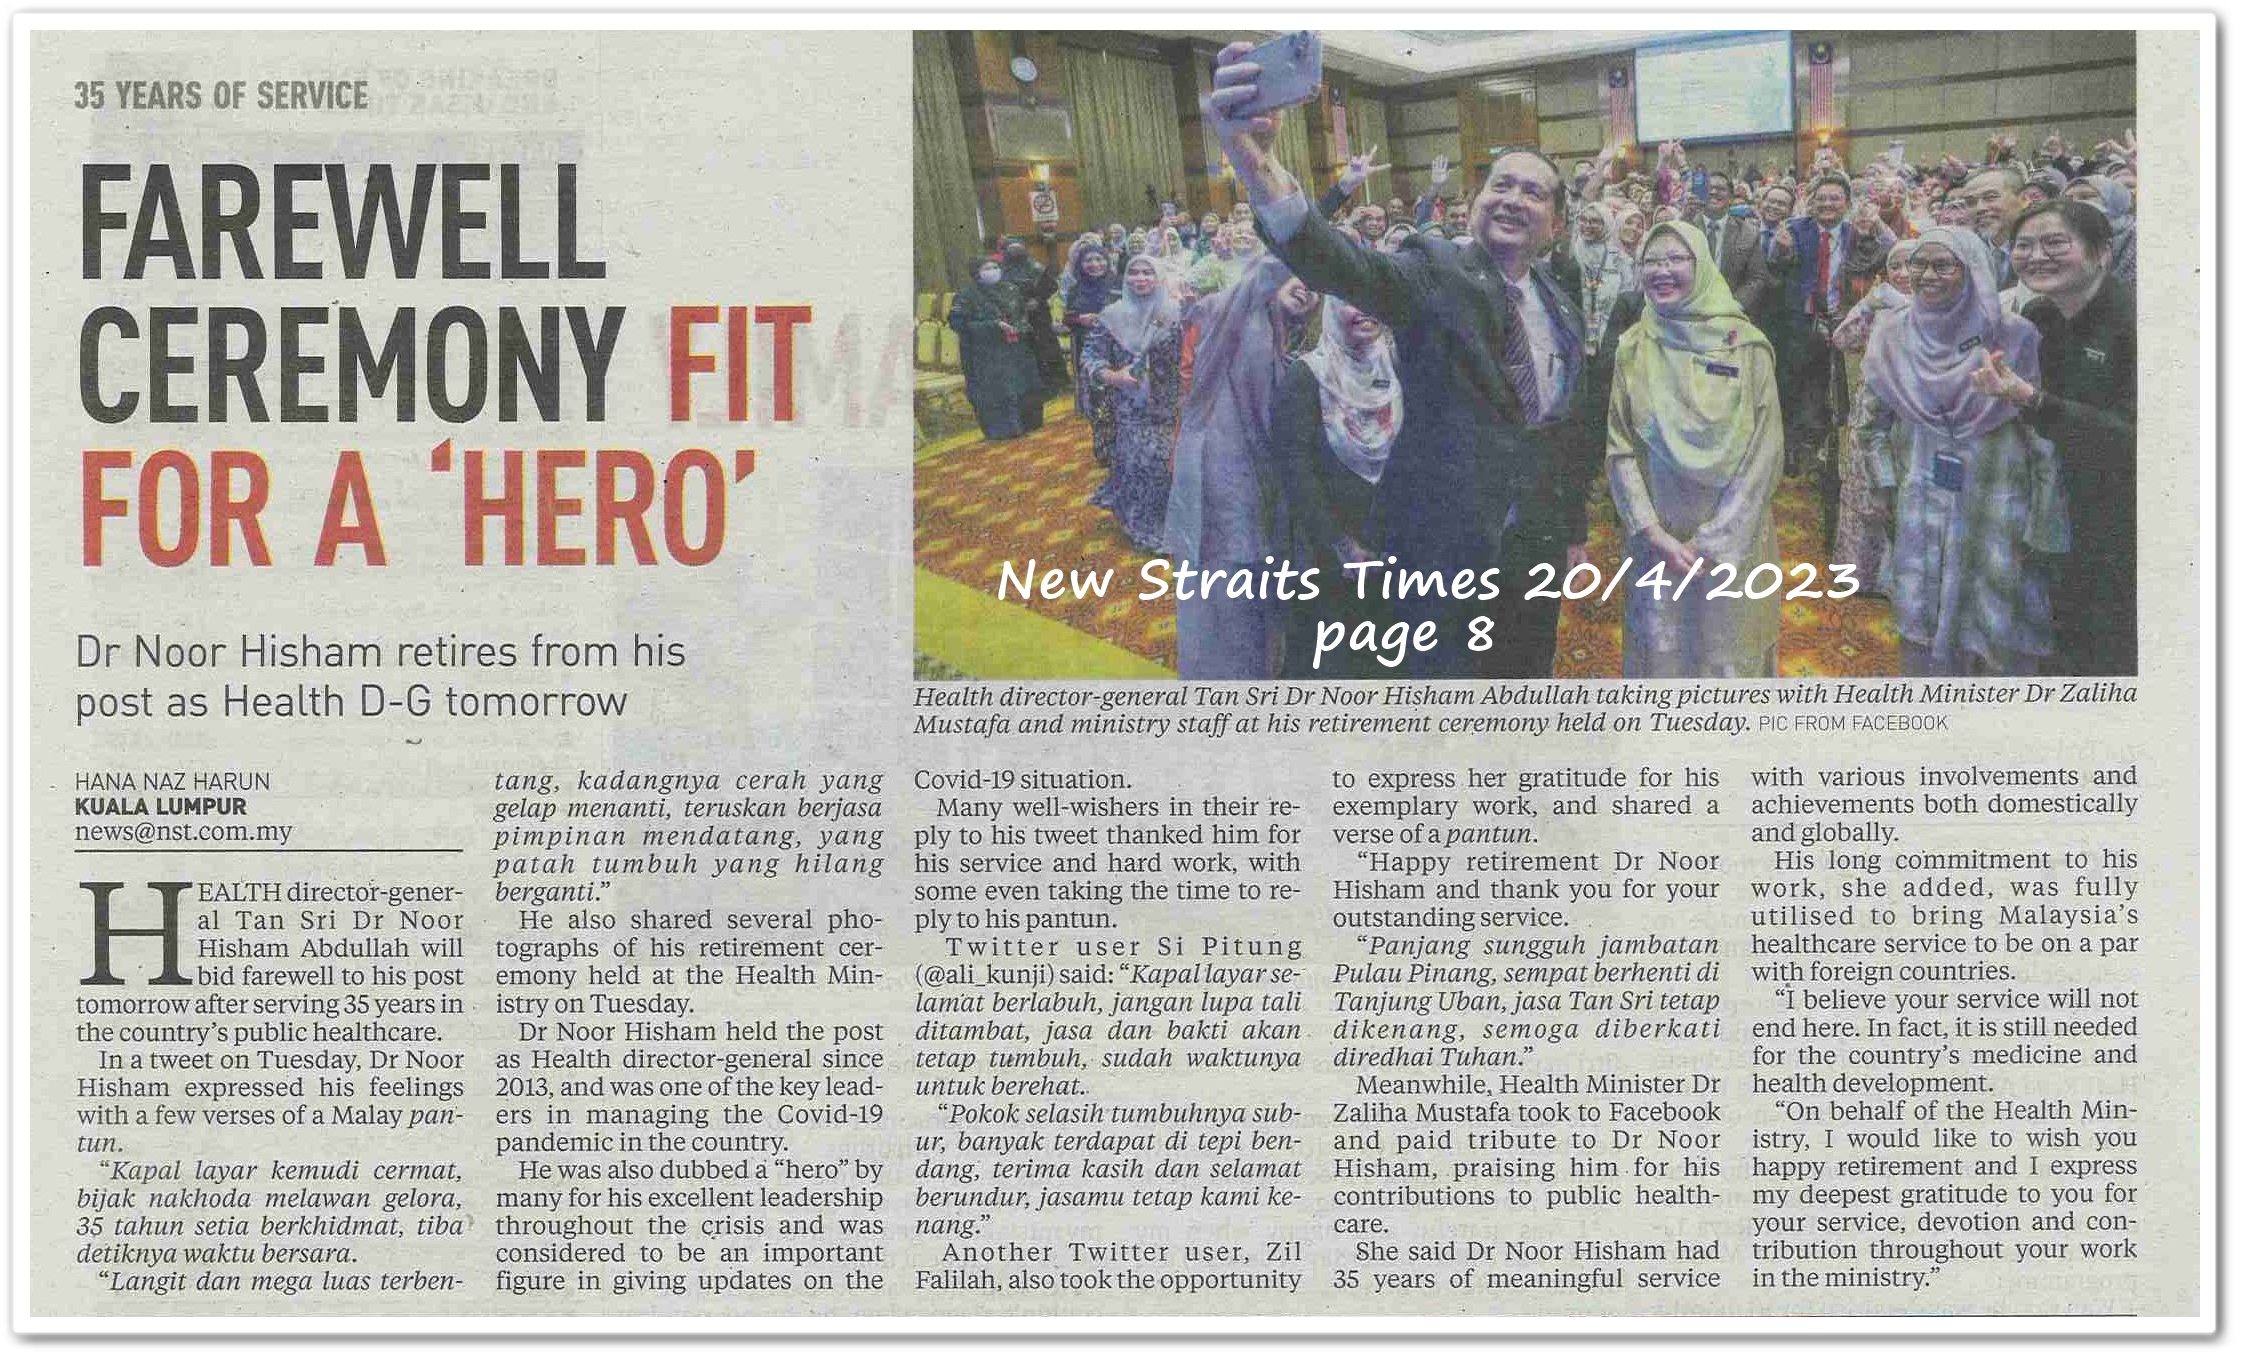 Farewell ceremony fit for a 'hero' ; Dr Noor Hisham retires from his post as Health D-G tomorrow - Keratan New Straits Times 20 April 2023